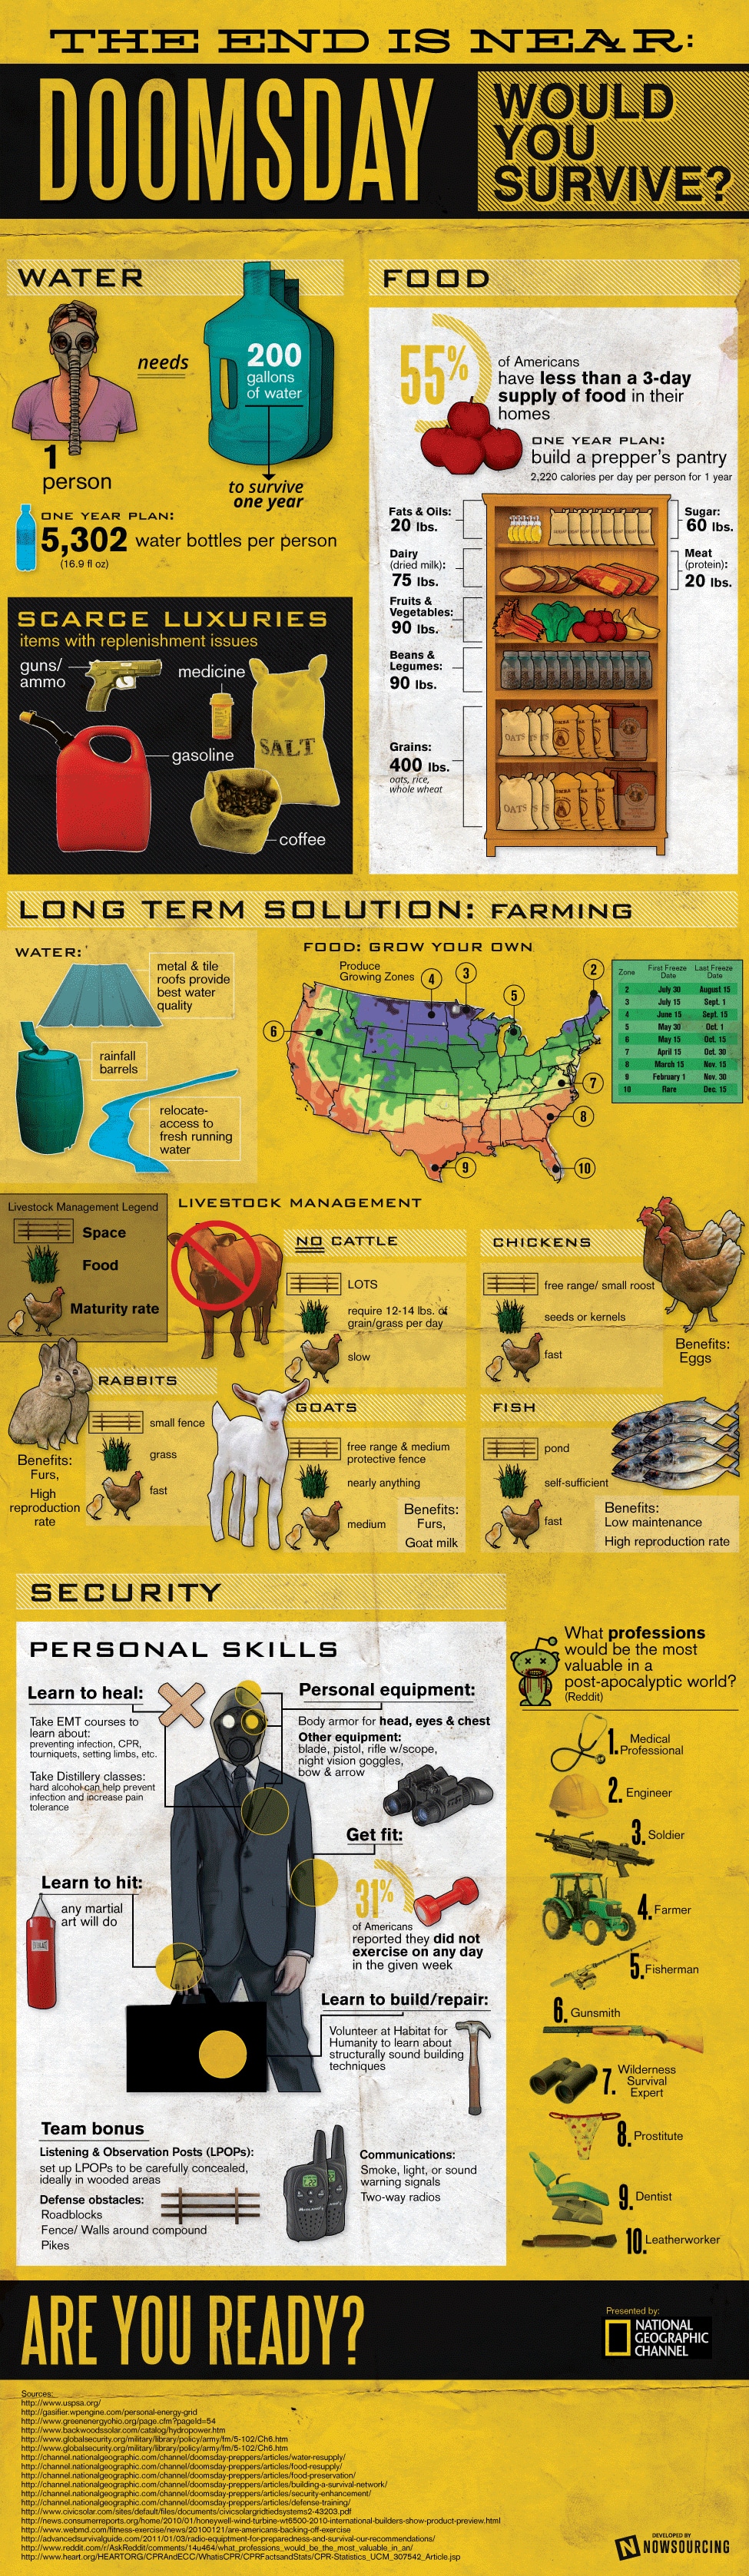 doomsday-prepper-survival-guide-infographic